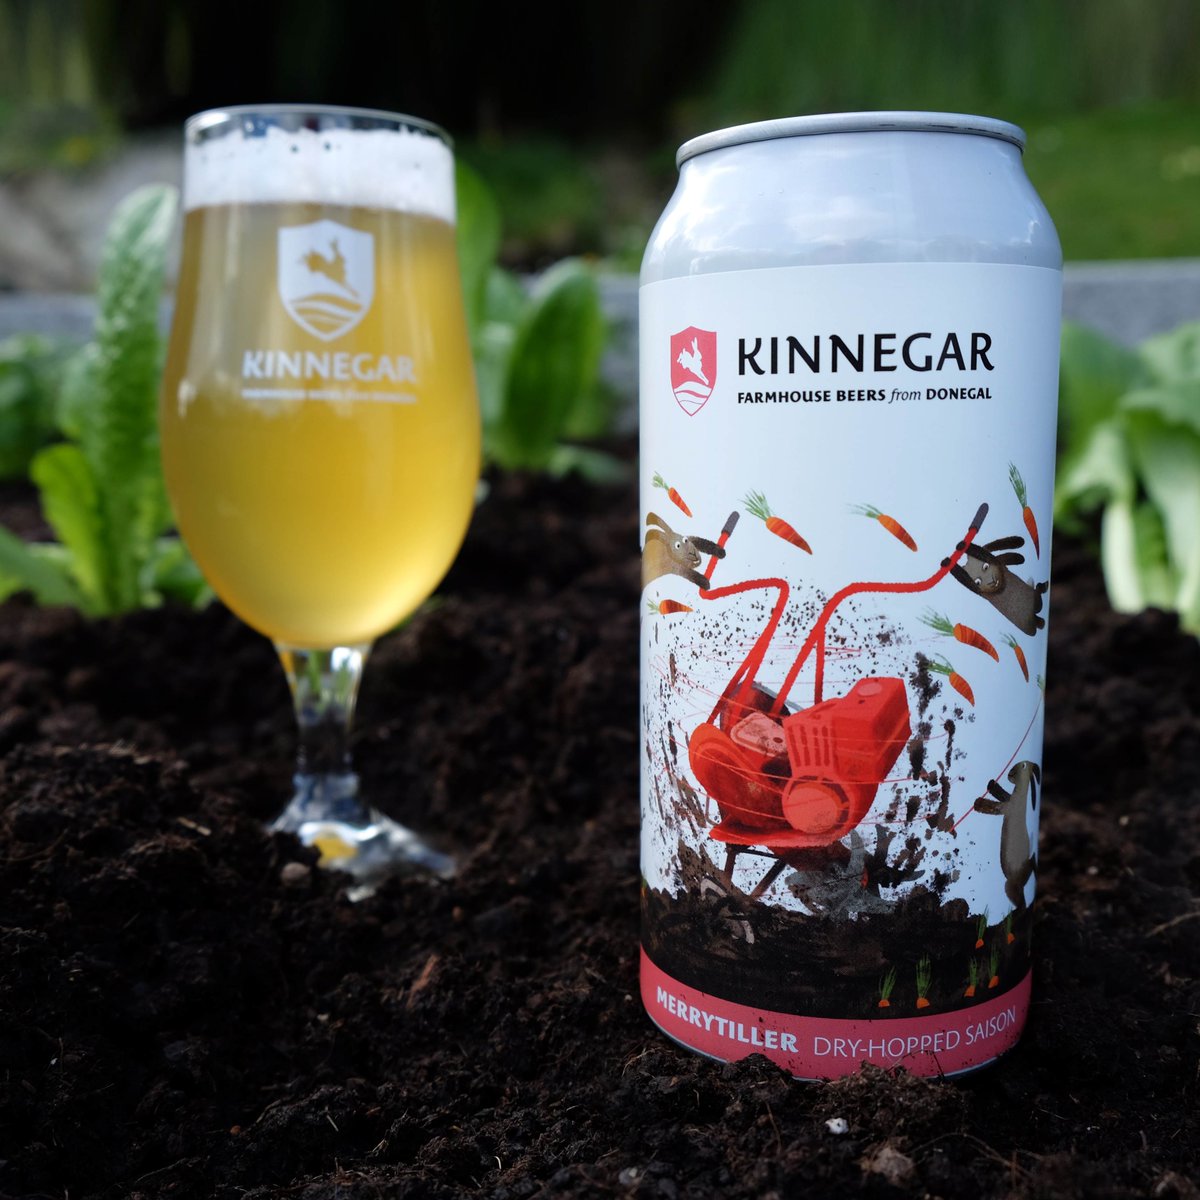 MERRYTILLER SEASON Like every good farmer we rotate our crops here at Kinnegar. Last year the Merrytiller acre lay fallow but this year it's back in tillage with an abundant crop of our much-loved dry-hopped Saison. Available now from usual outlets and 24/7 from our Webshop.